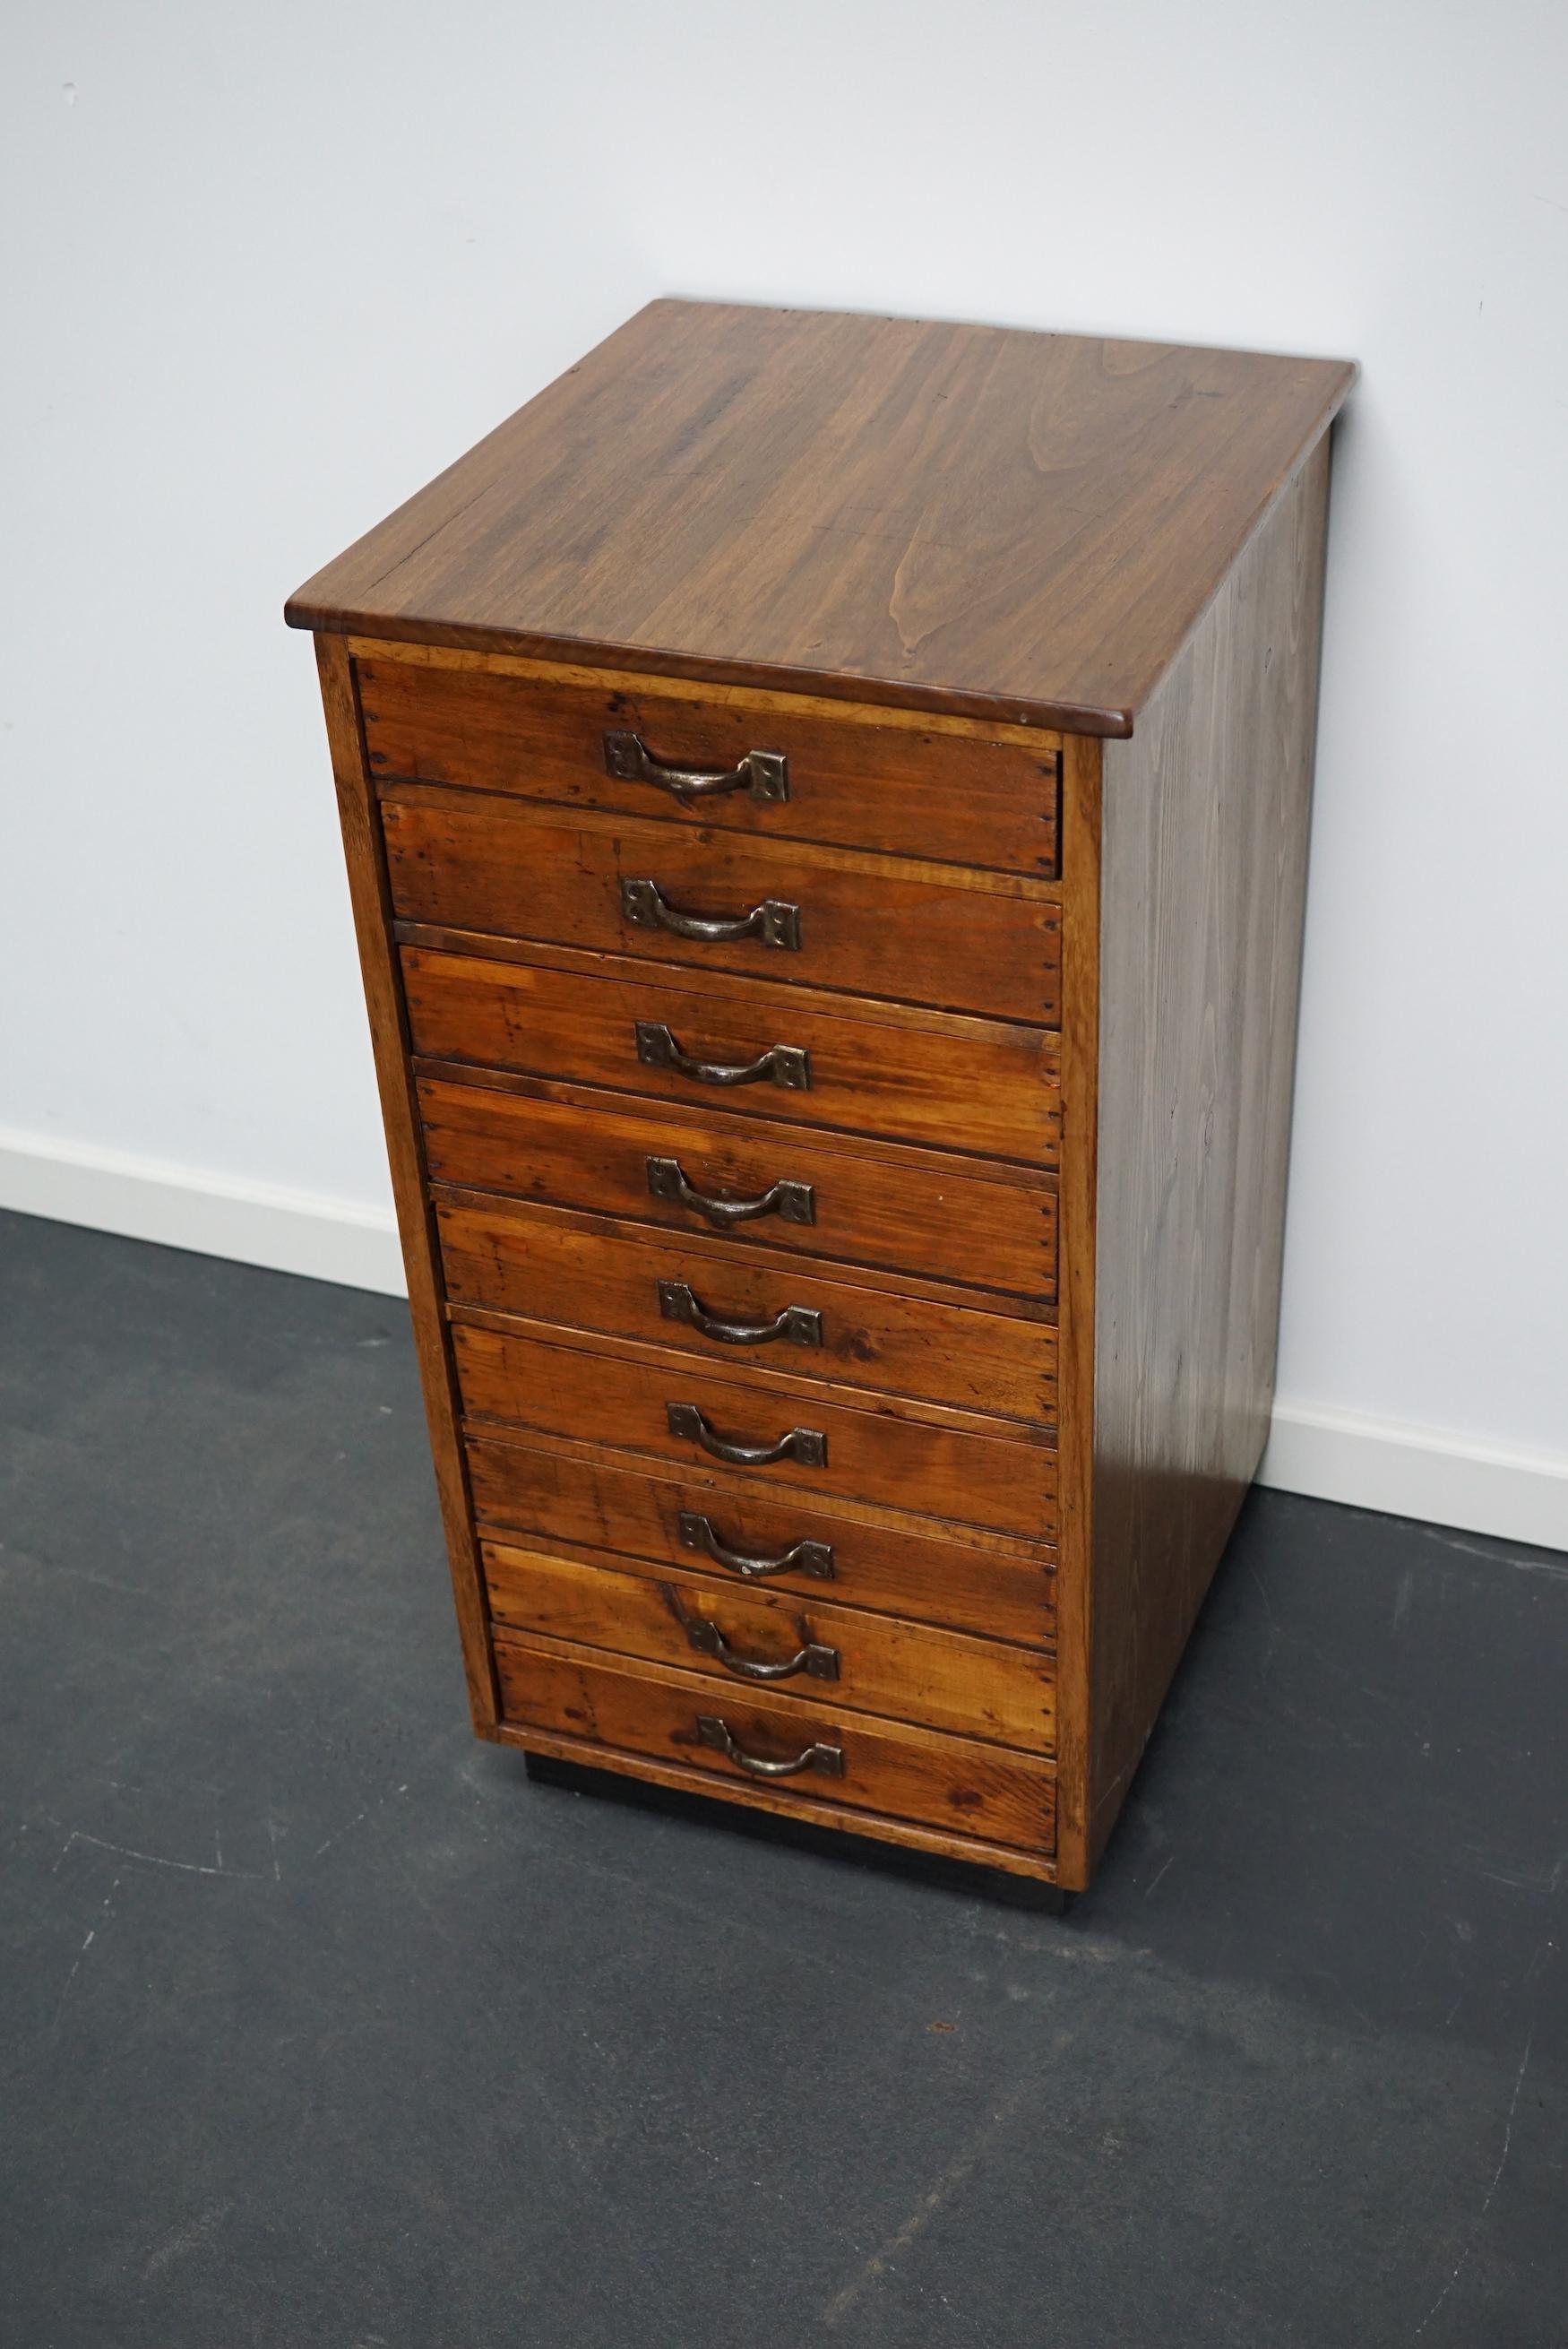 This apothecary cabinet was designed and made circa 1930/1940 in France. It features 9 pine fronted drawers with nice handles and a beech top. The interior dimensions of the drawers are: DWH 40 x 32 x 6 cm.